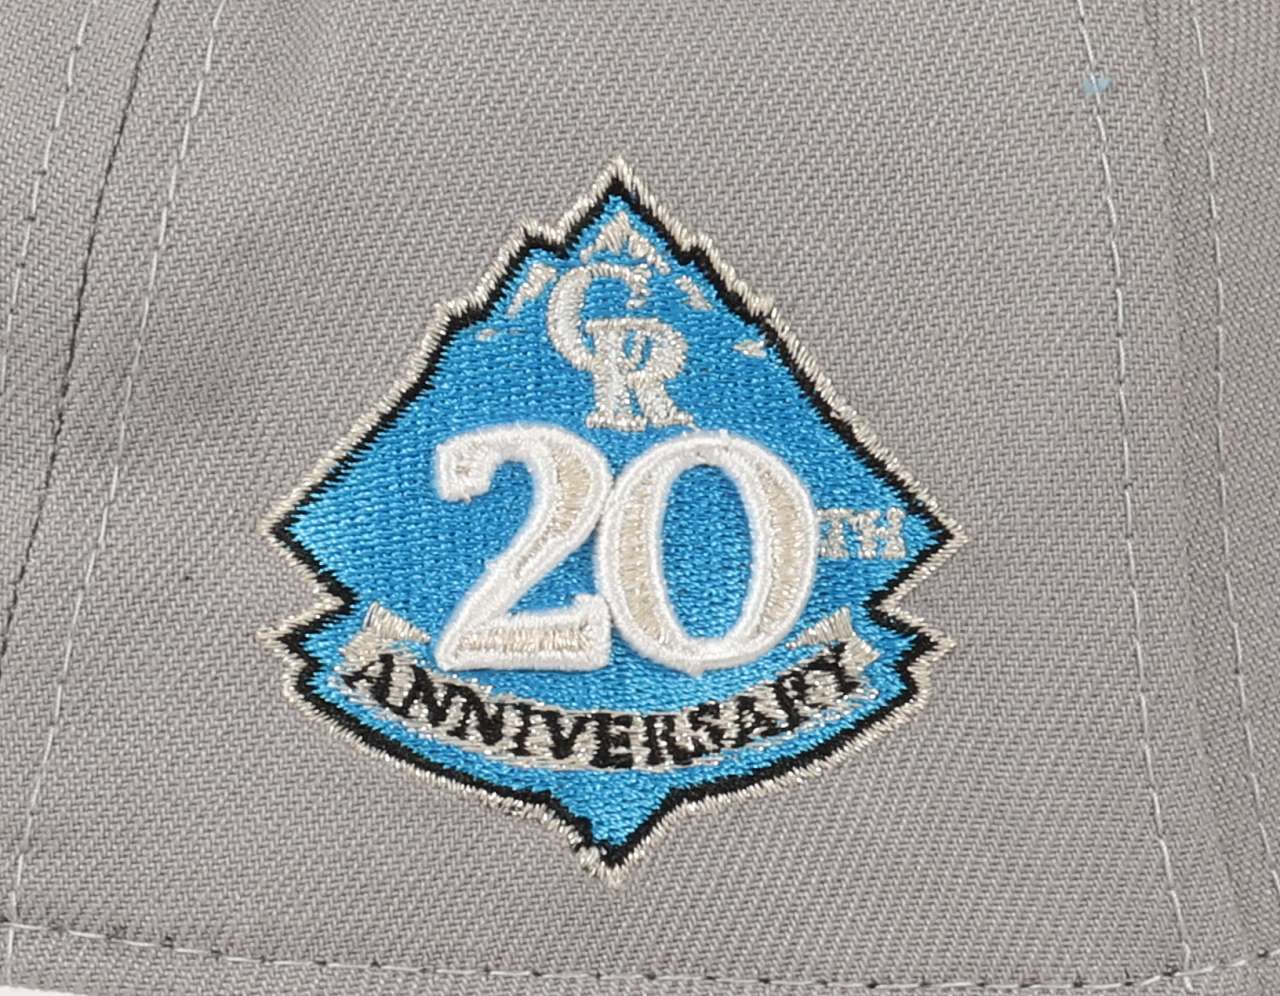 Colorado Rockies MLB 20th anniversary Sidepatch Cooperstown Gray Sky 9Forty A-Frame Snapback Cap New Era